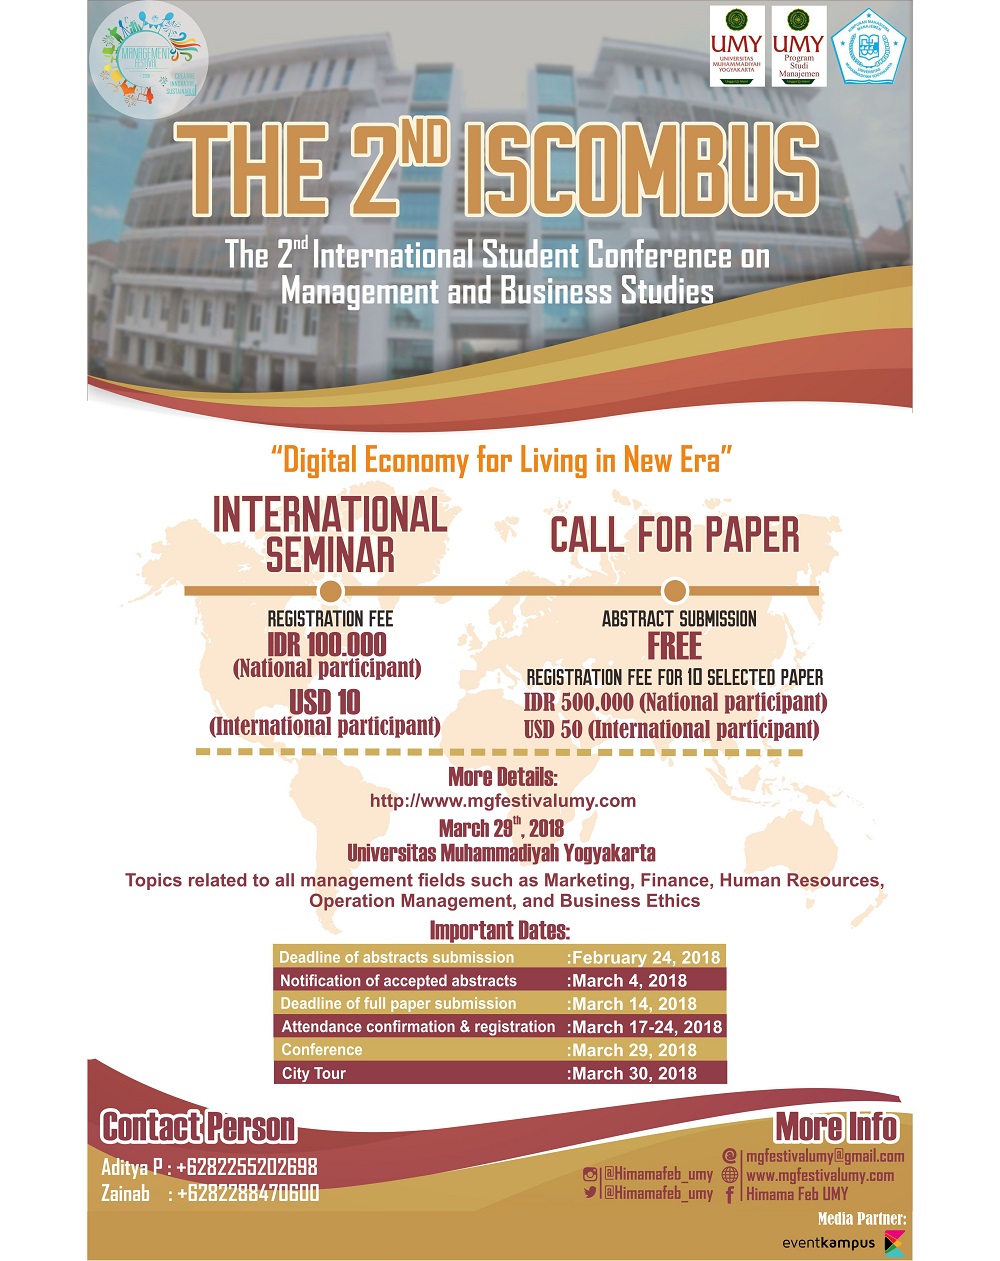 2nd-international-student-conference-management-business-studies-iscombus-2018